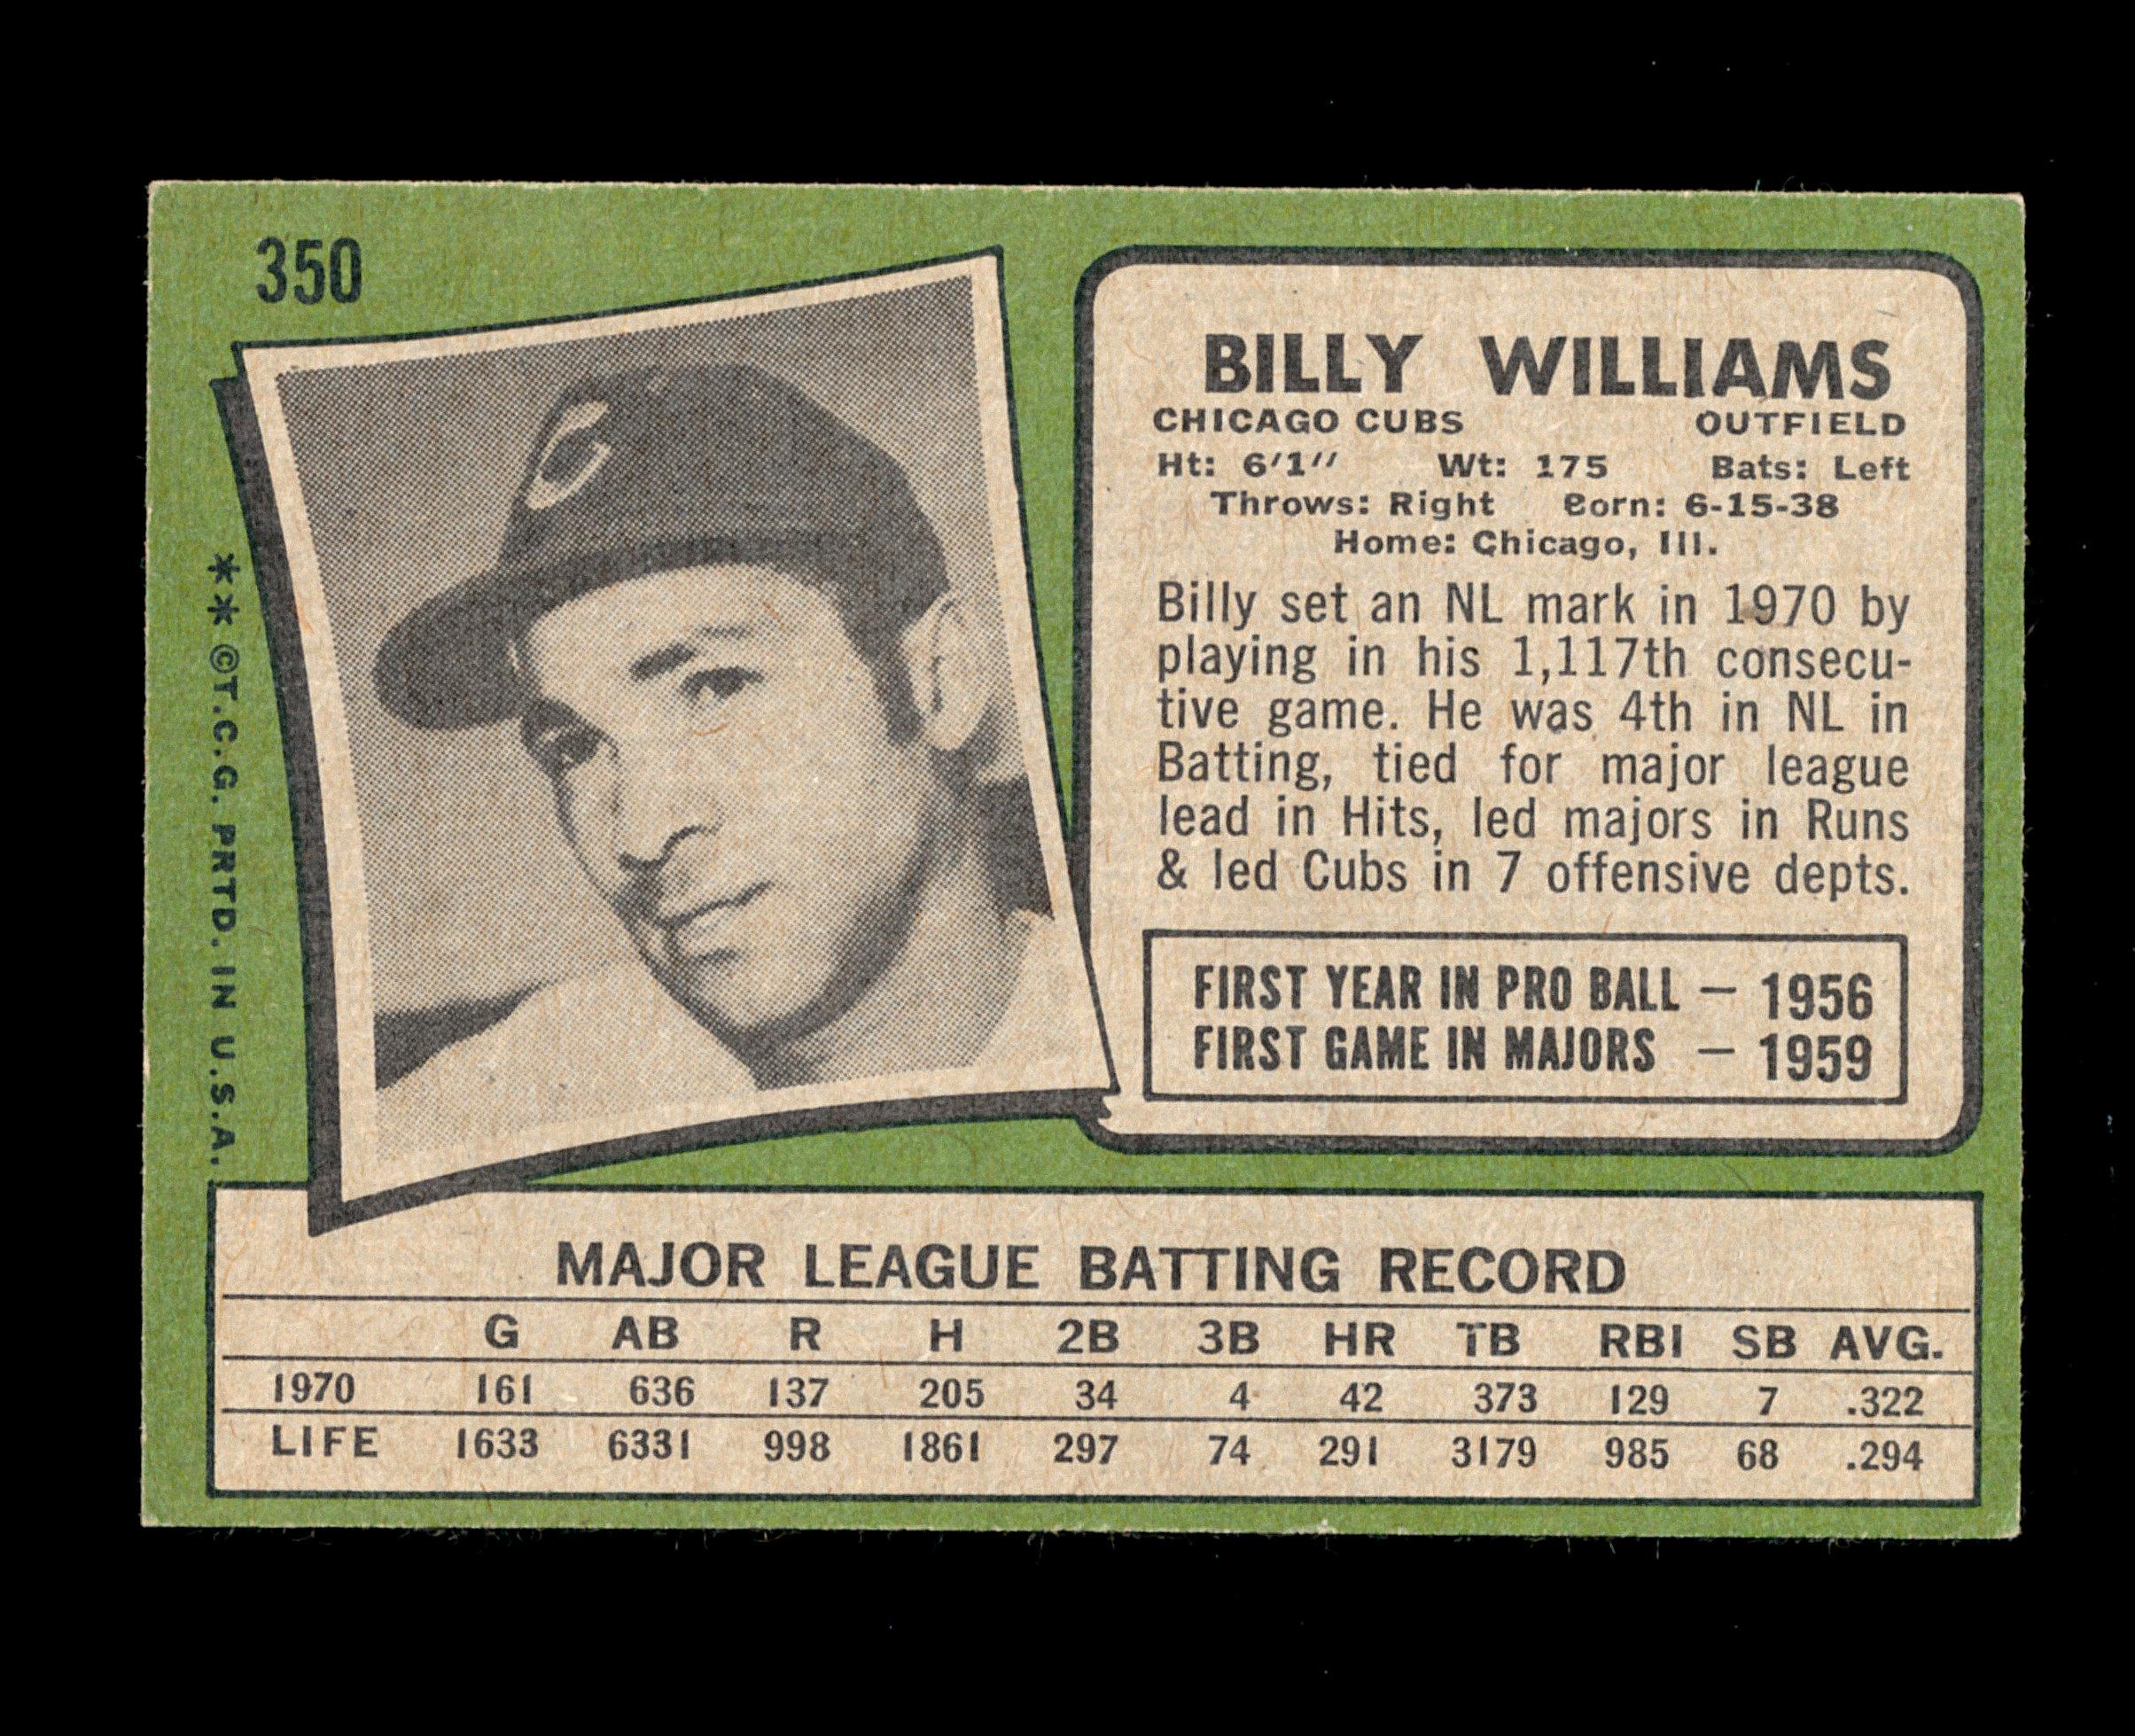 1971 Topps Baseball Card #350 Hall of Famer Billy Williams Chicago Cubs